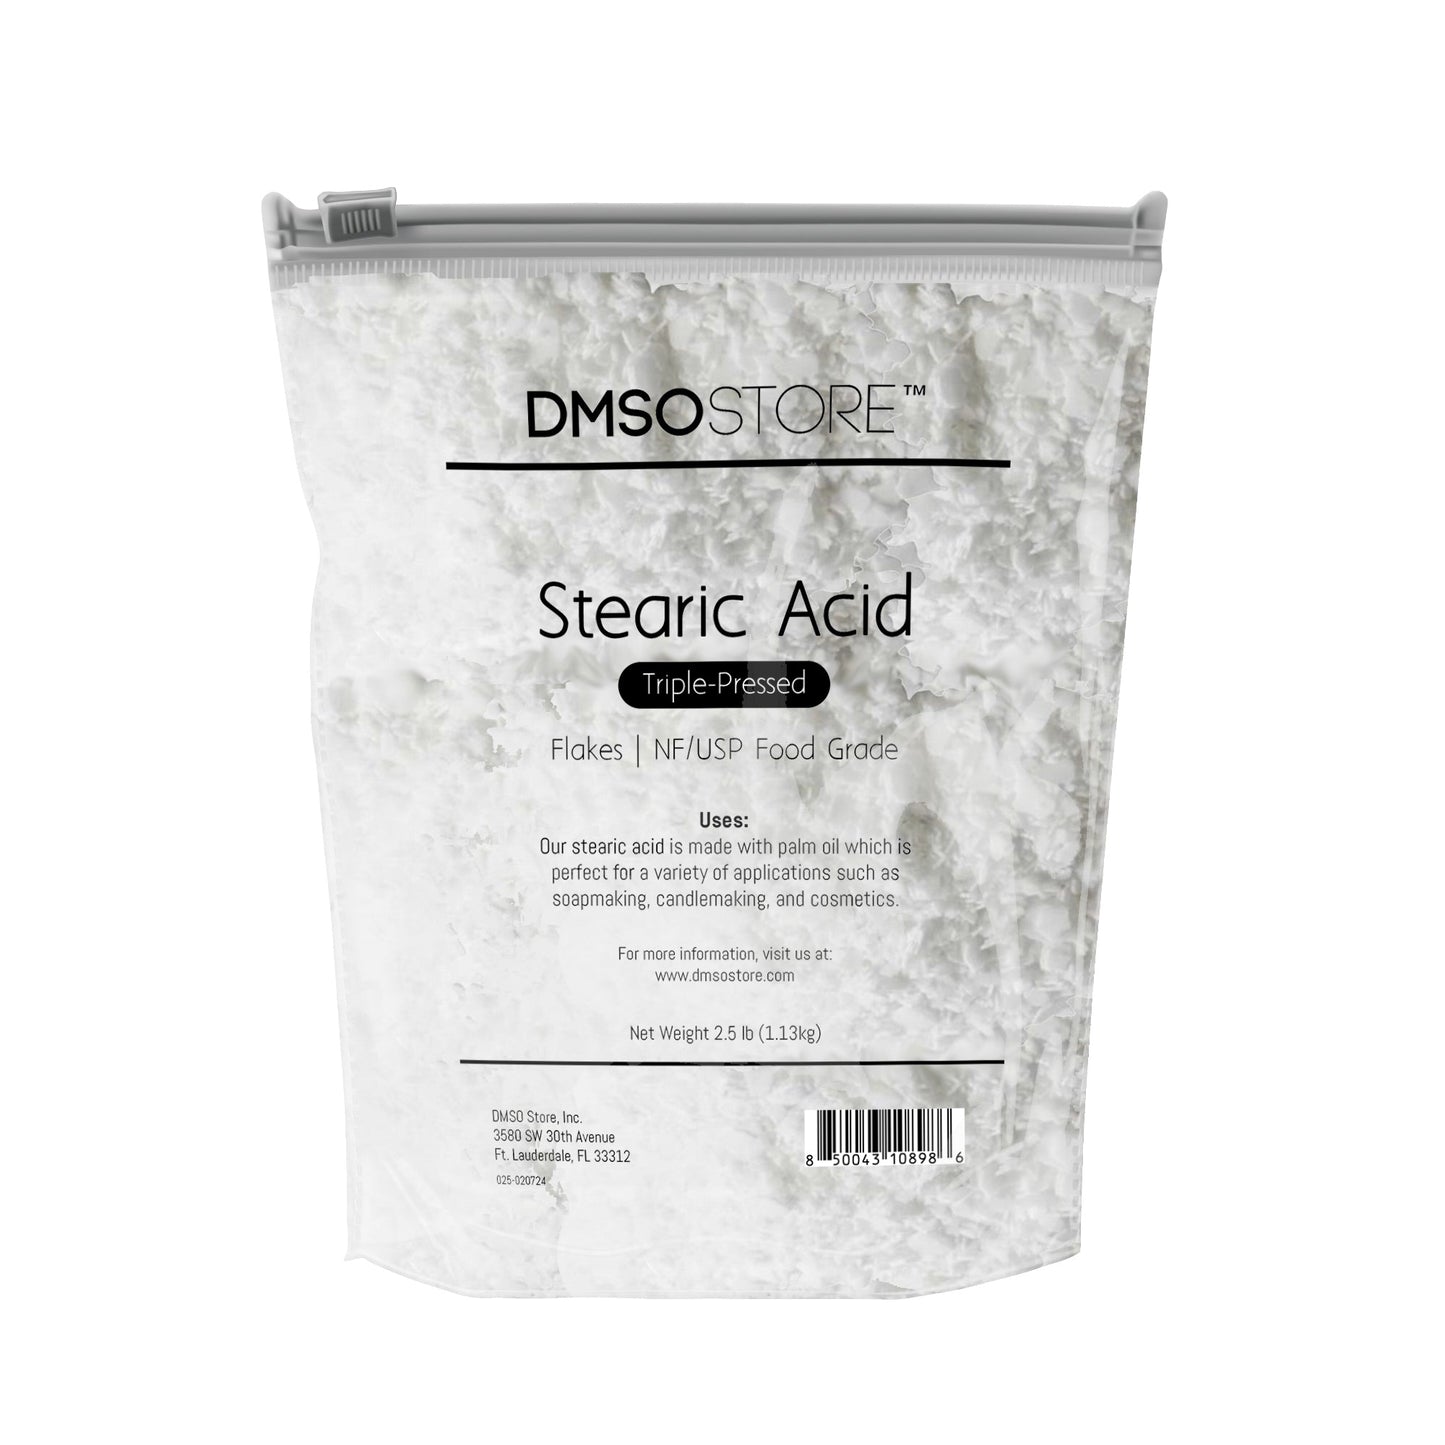 2.5 lb DMSO Store brand Stearic Acid flakes, triple-pressed and NF/USP food grade, for soap making, candle making, and cosmetics. 